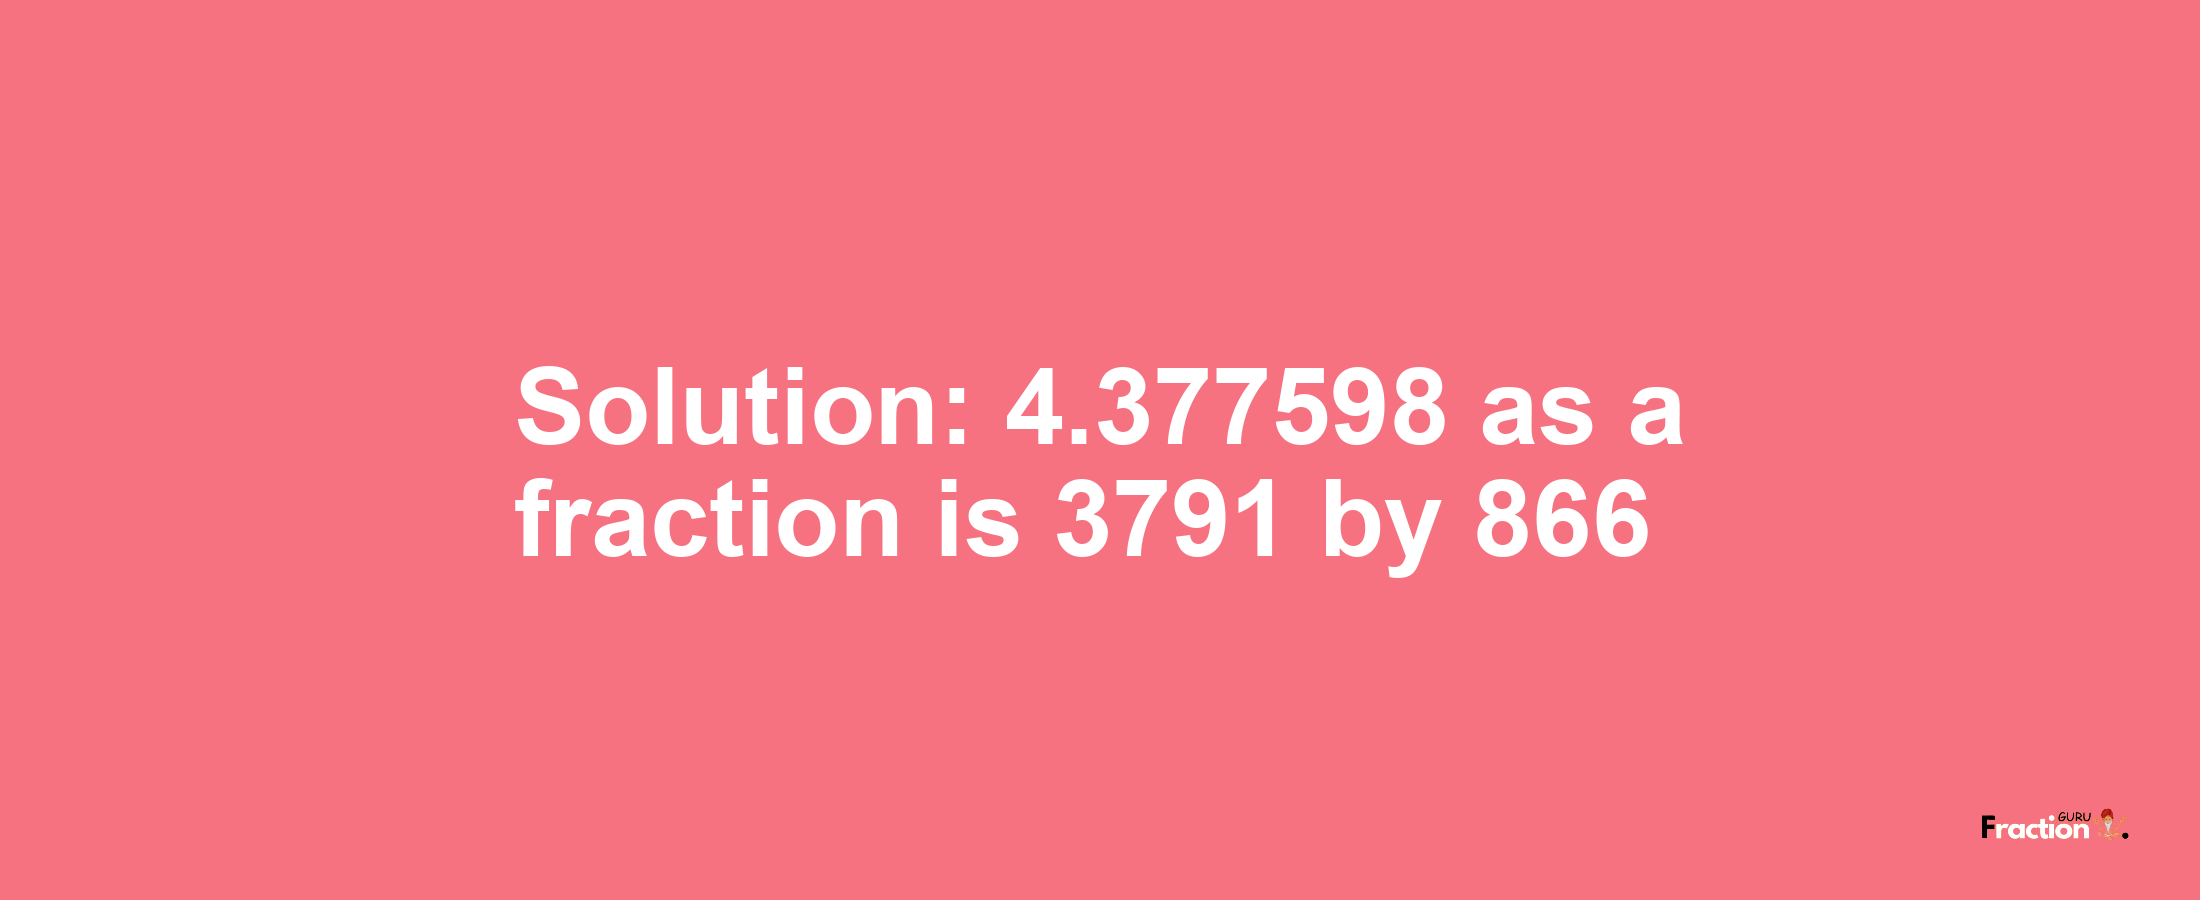 Solution:4.377598 as a fraction is 3791/866